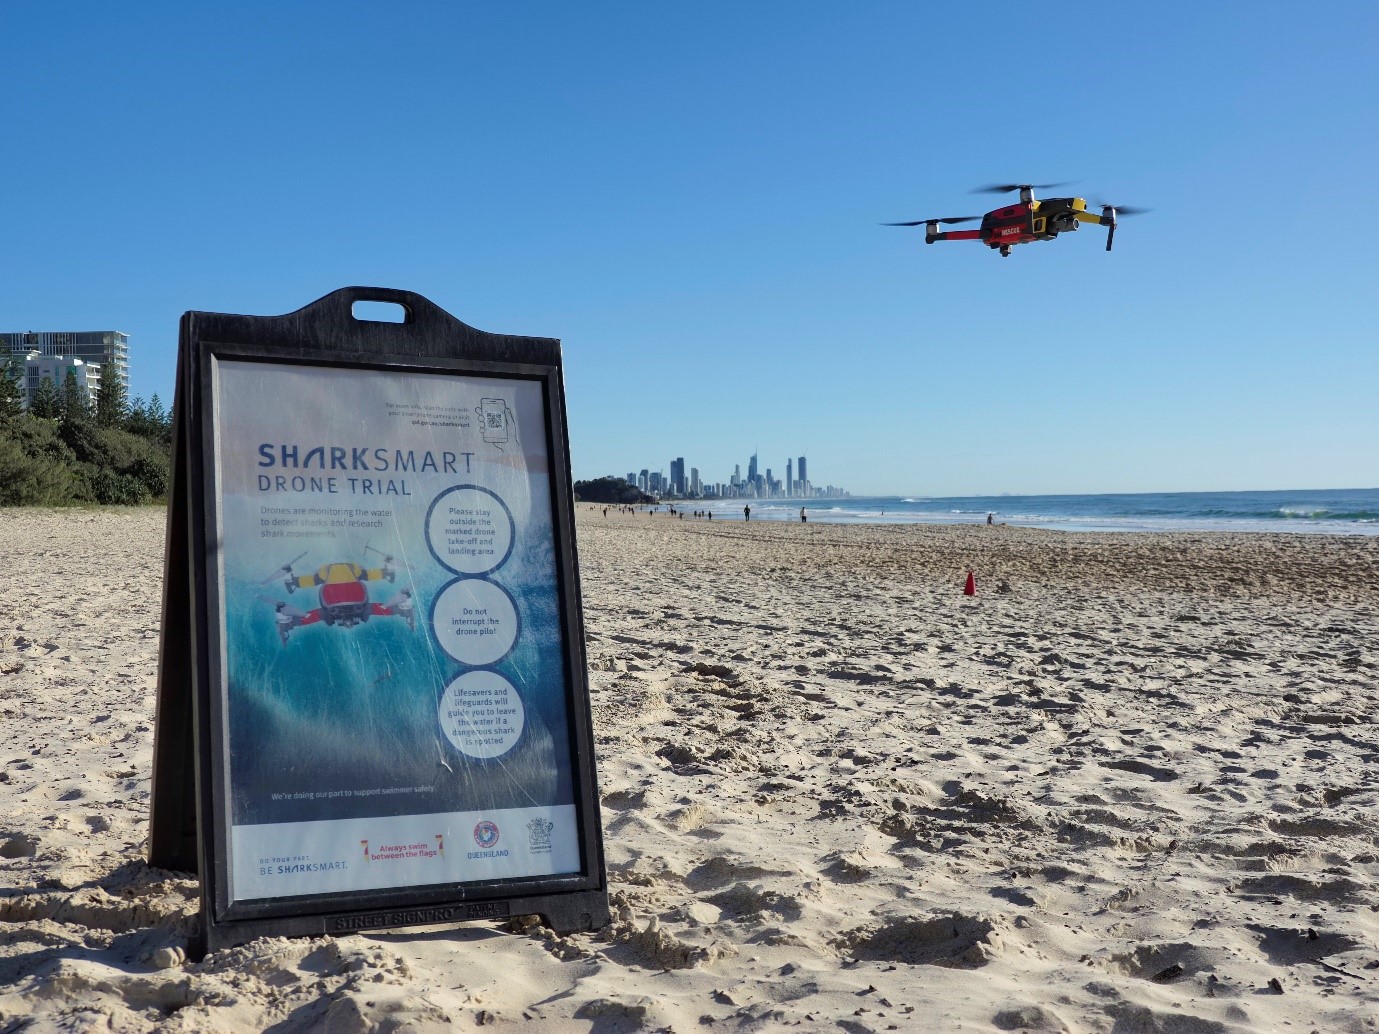 Sign on beach telling people drone trial in progress. Drone in background.